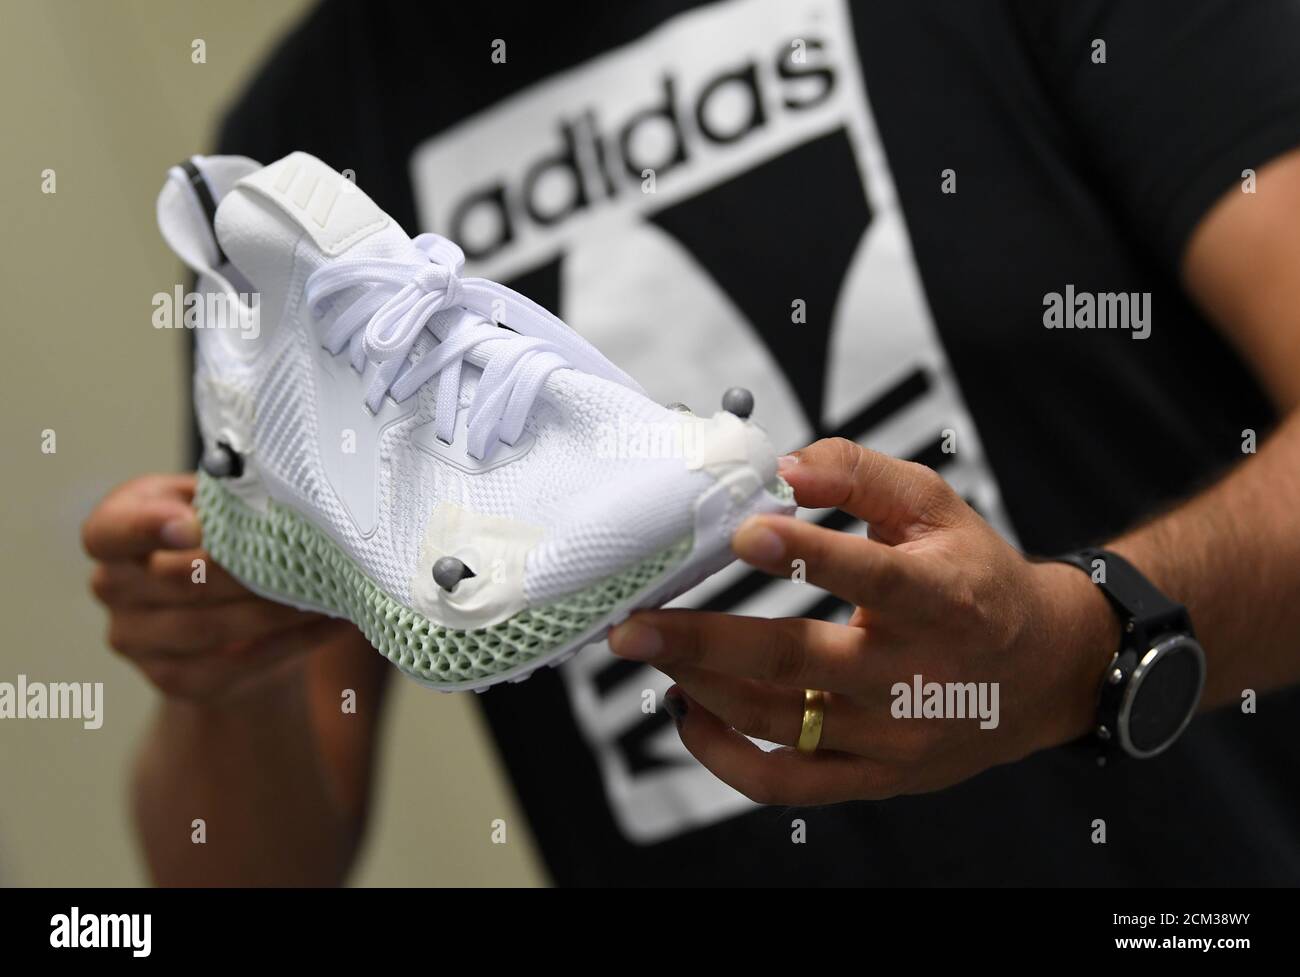 The Adidas shoe Alphaedge with a Elastomer mid-sole from a 3D printer is  presented during celebrations for German sports apparel maker Adidas' 70th  anniversary at the company's FutureLab in Herzogenaurach, Germany, August